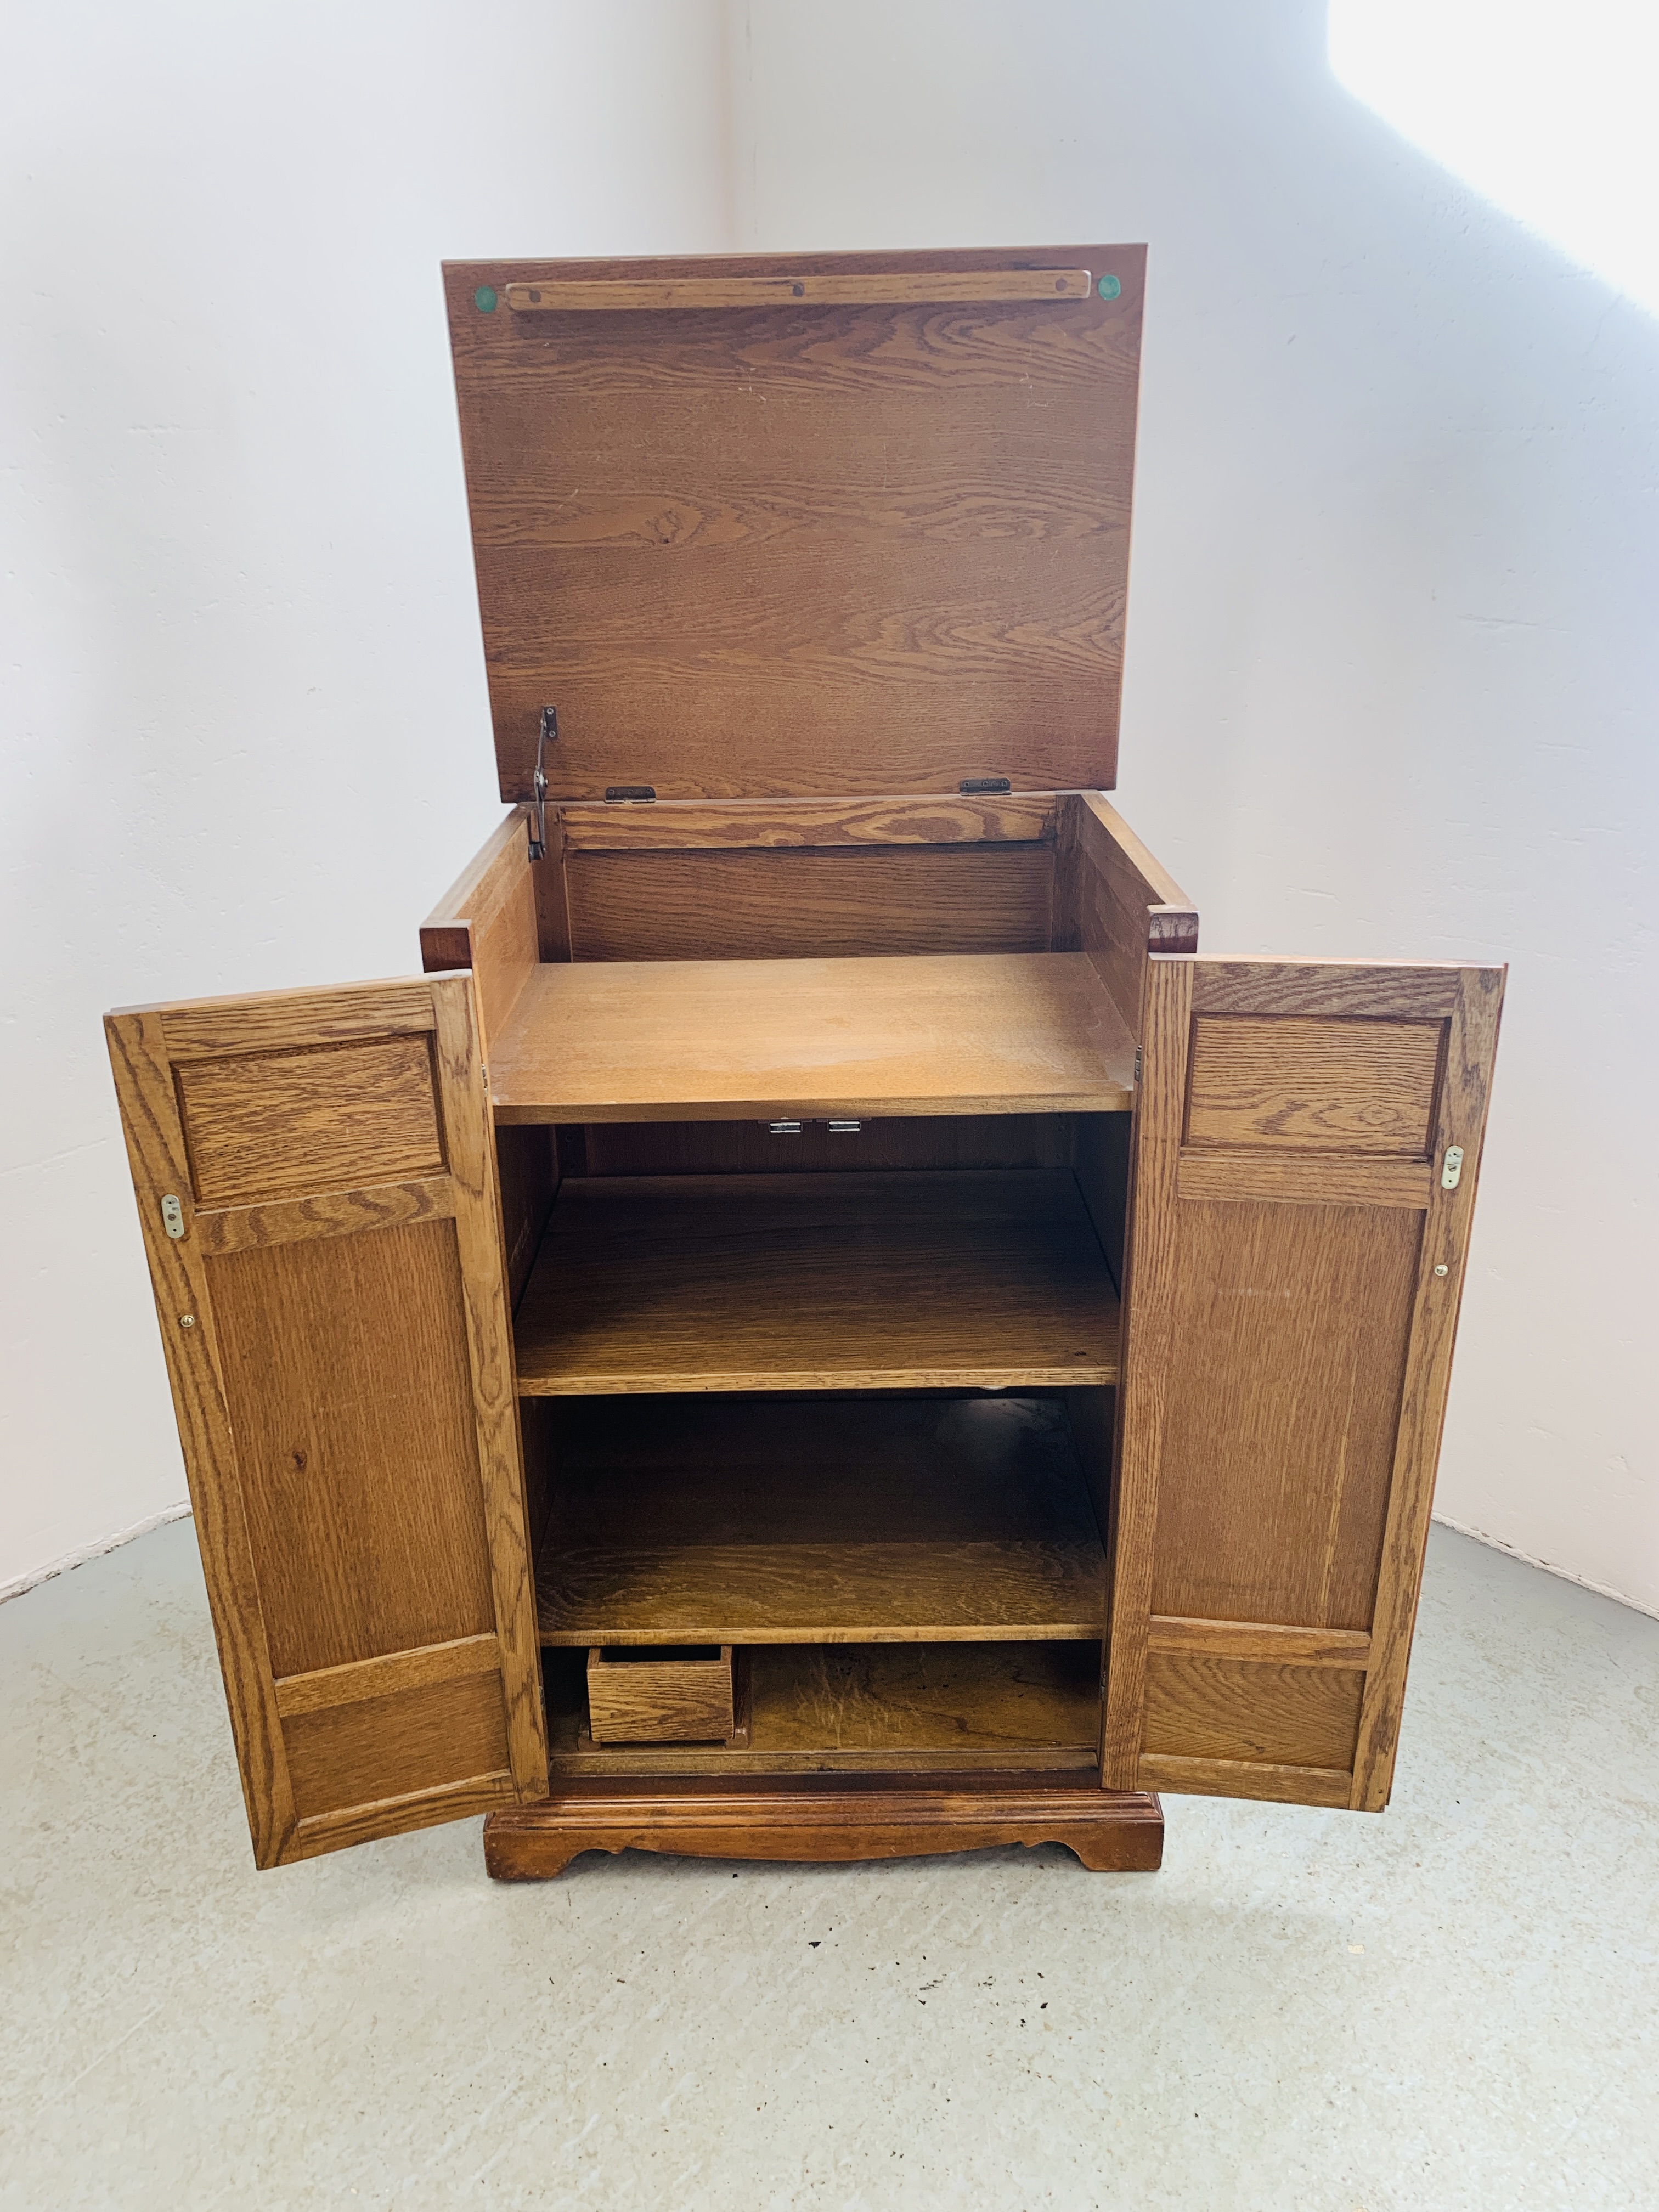 AN OLD CHARM STYLE TWO DOOR CABINET WITH SHELVED INTERIOR AND HINGED TOP - W 62CM. D 49CM. H 94CM. - Image 6 of 7